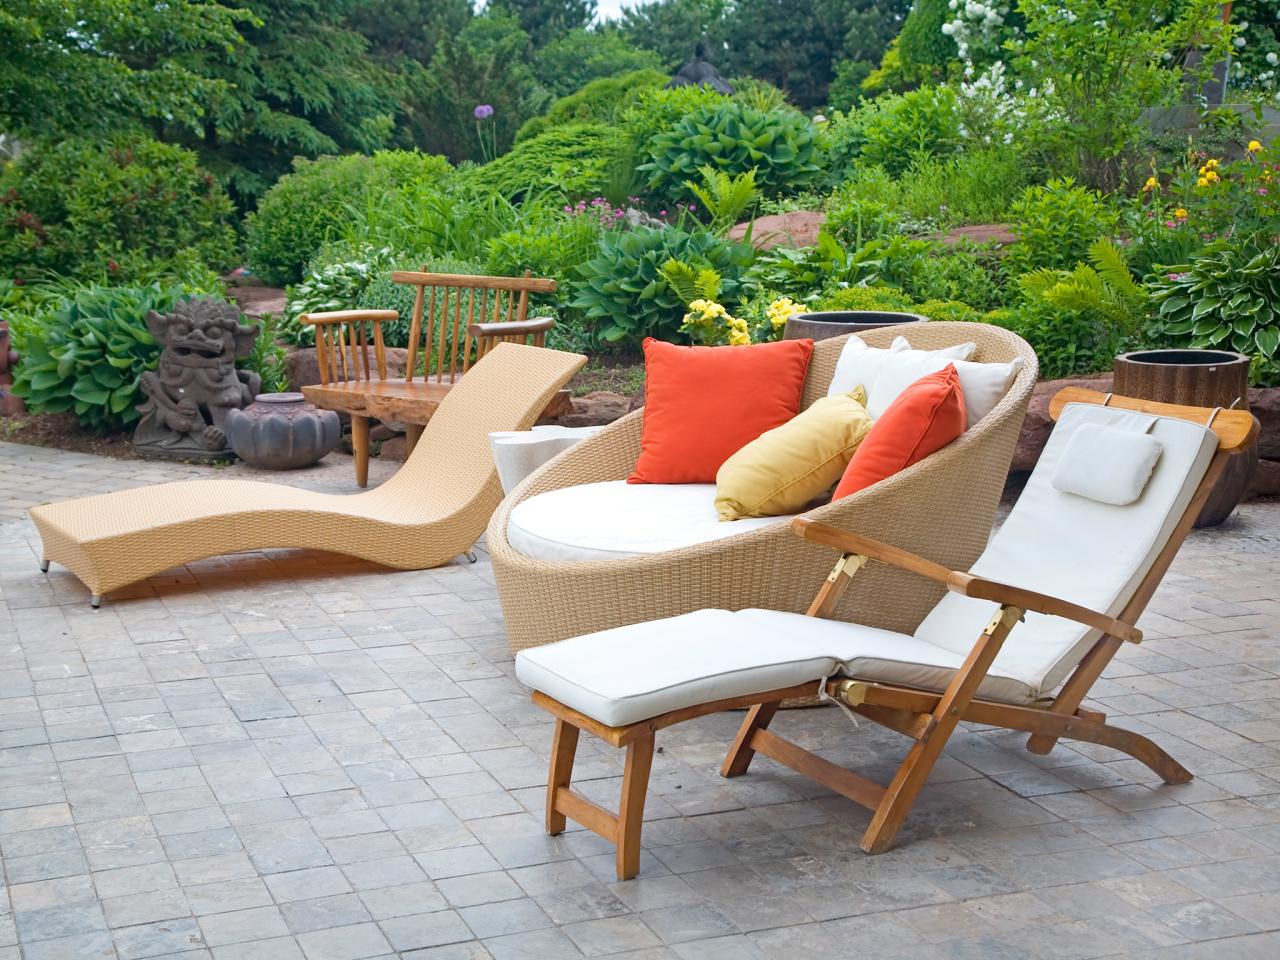 High-quality outdoor furniture